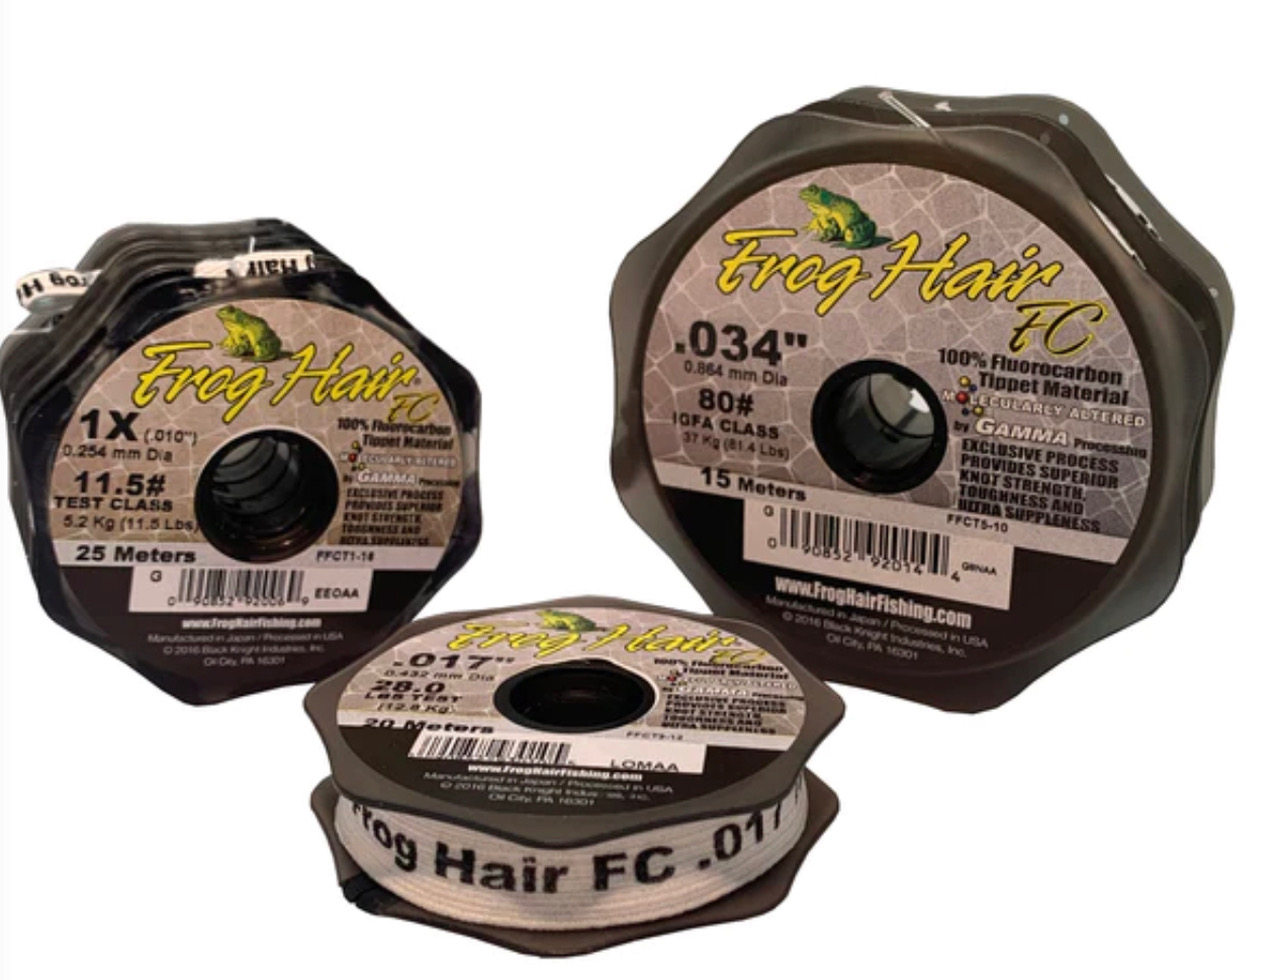 Frog Hair Fluorocarbon Tippet - 100m Guide Spool - 6X - 3.3lb